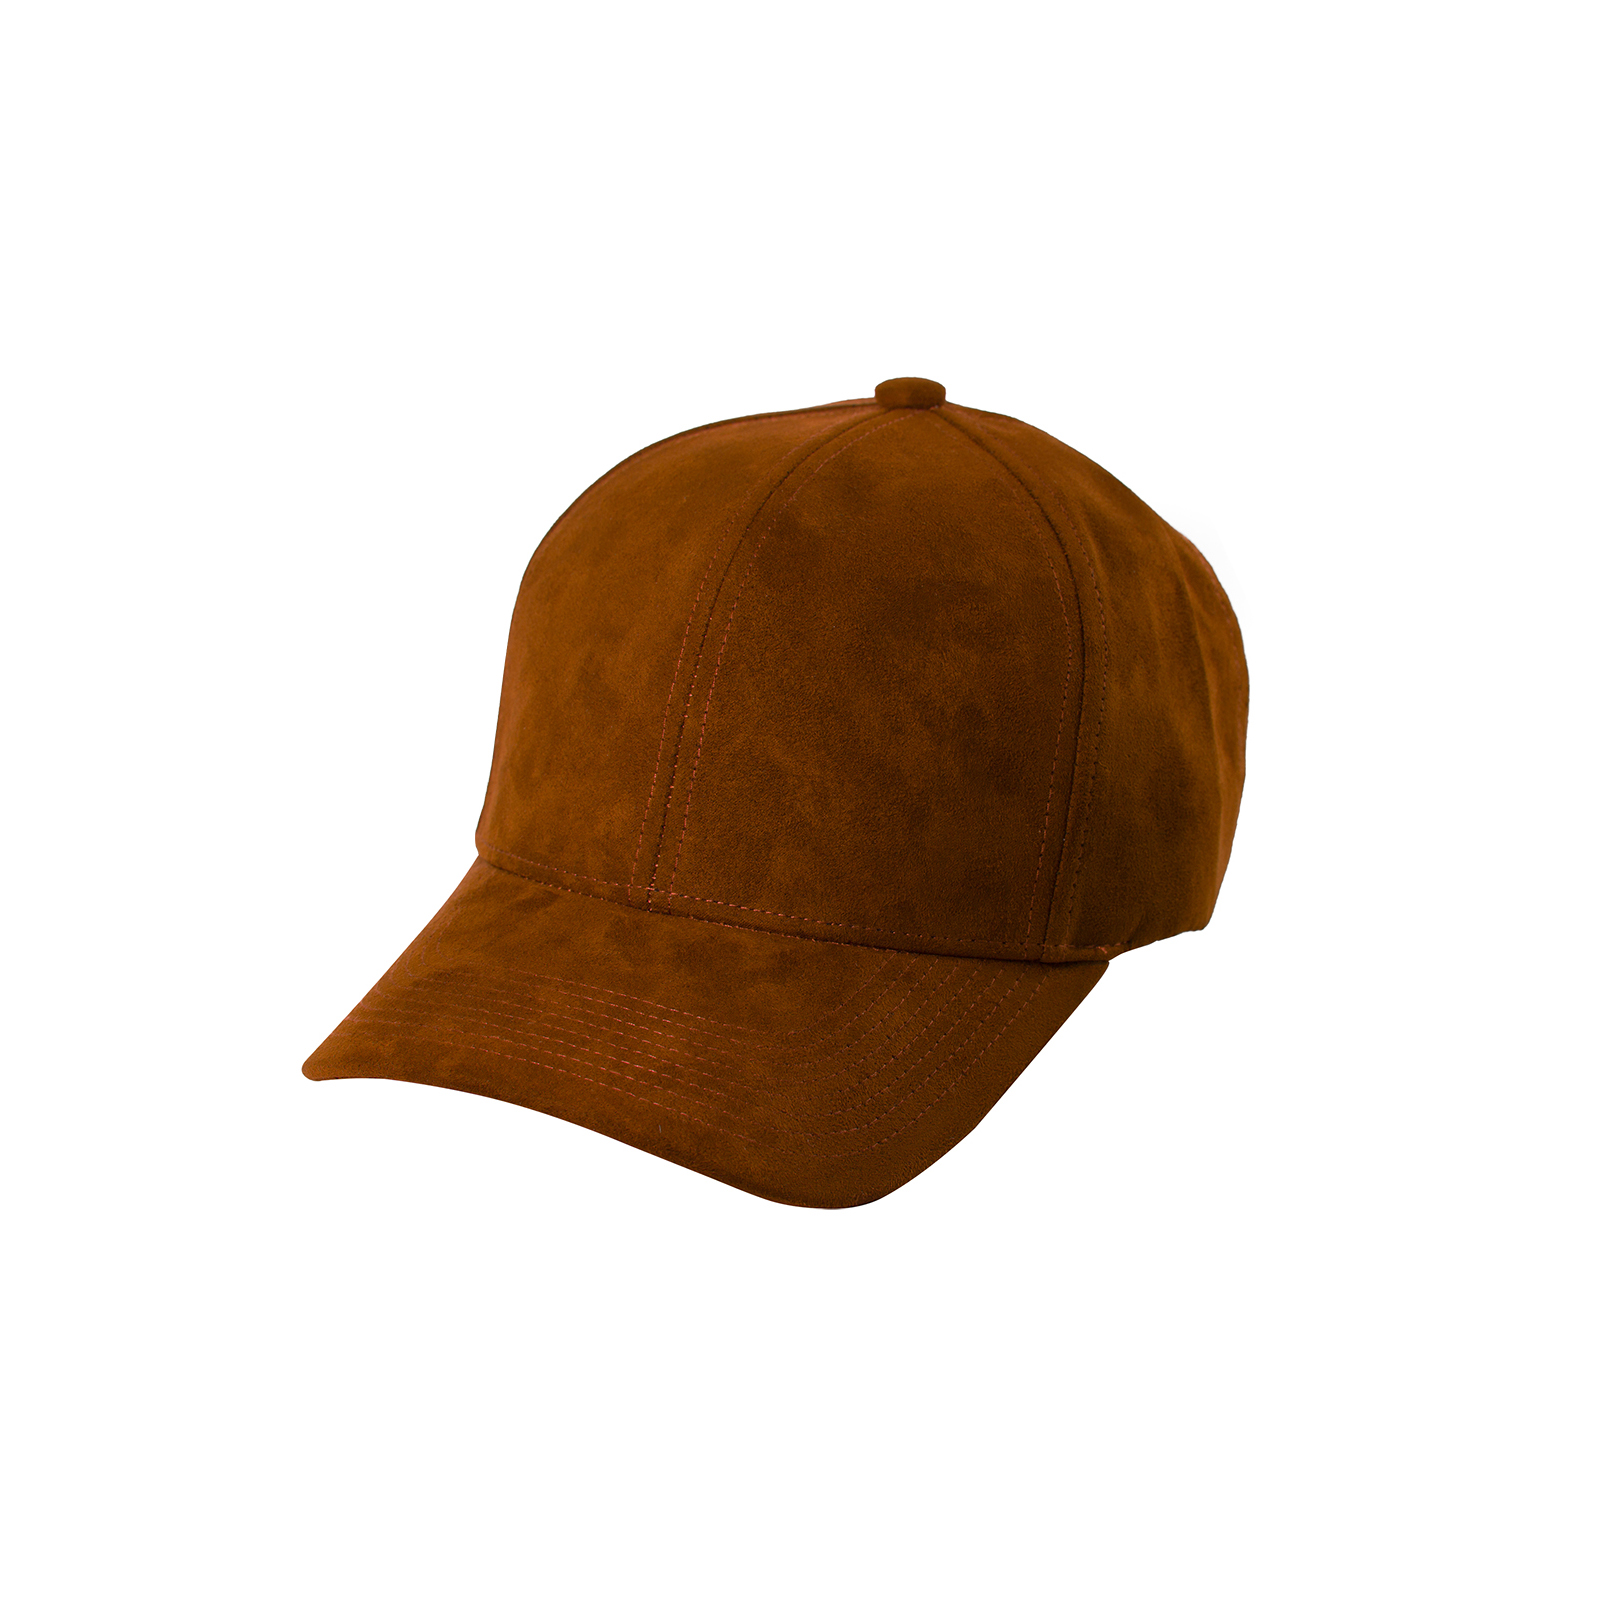 BASEBALL CAP BROWN SUEDE GOLD FRONT SIDE